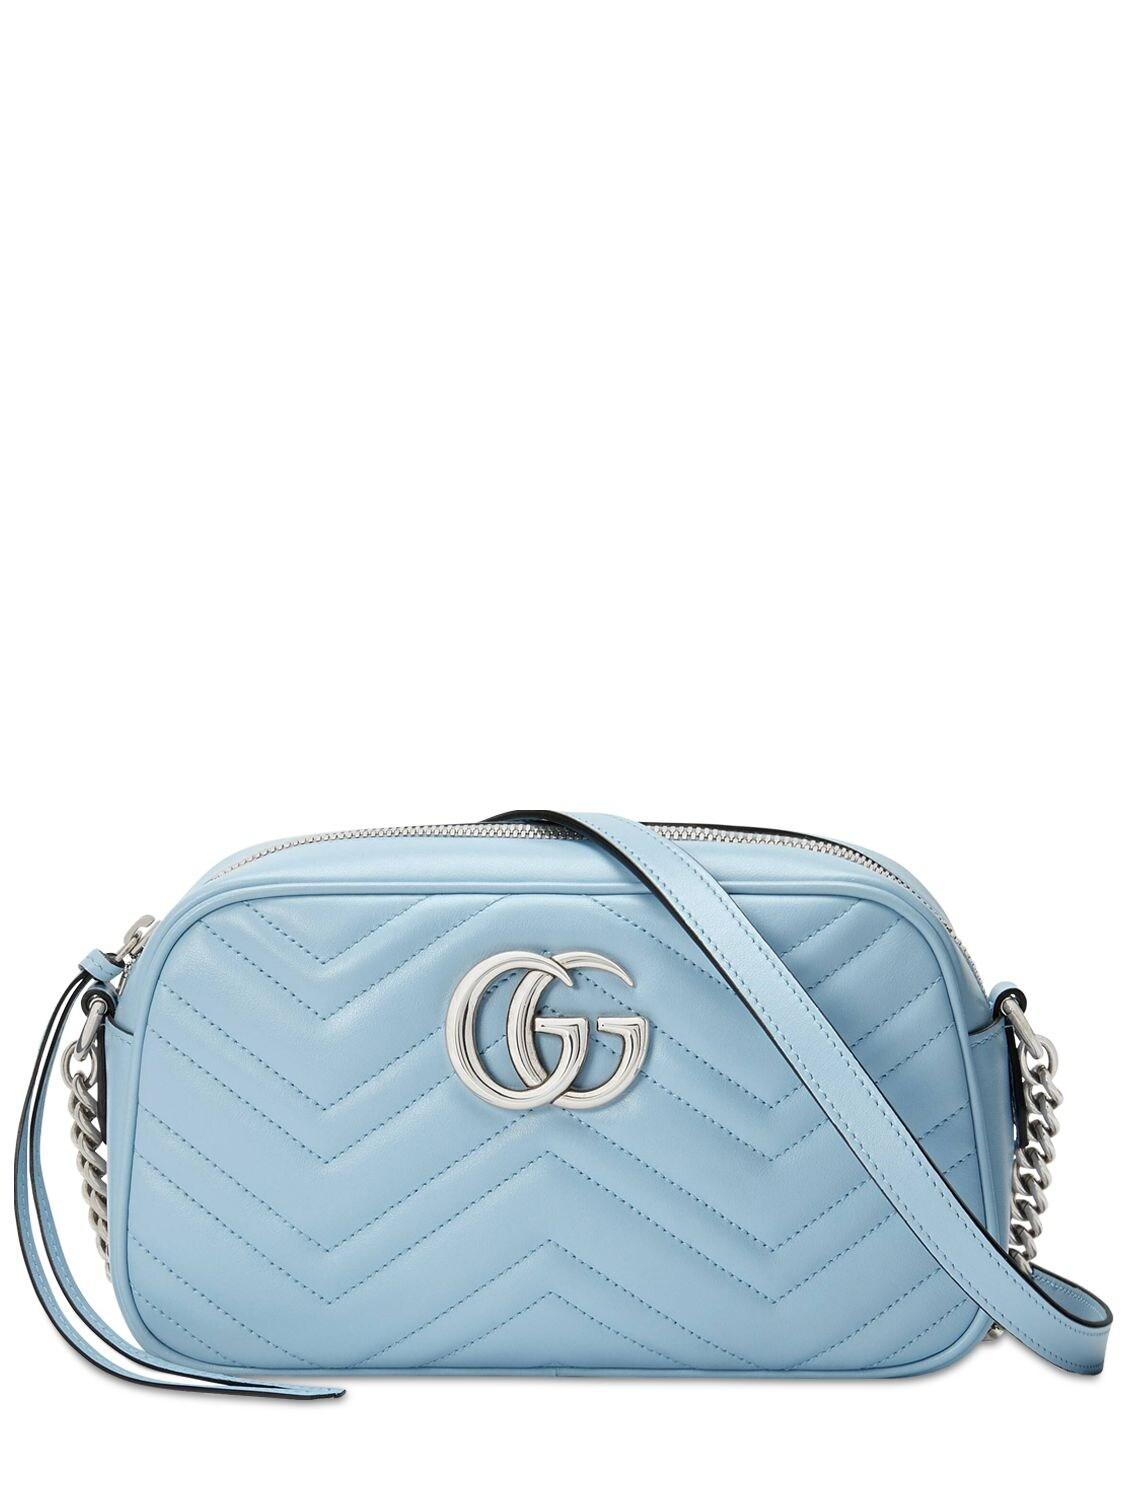 Gucci gg Marmont Small Shoulder Bag in Blue | Lyst